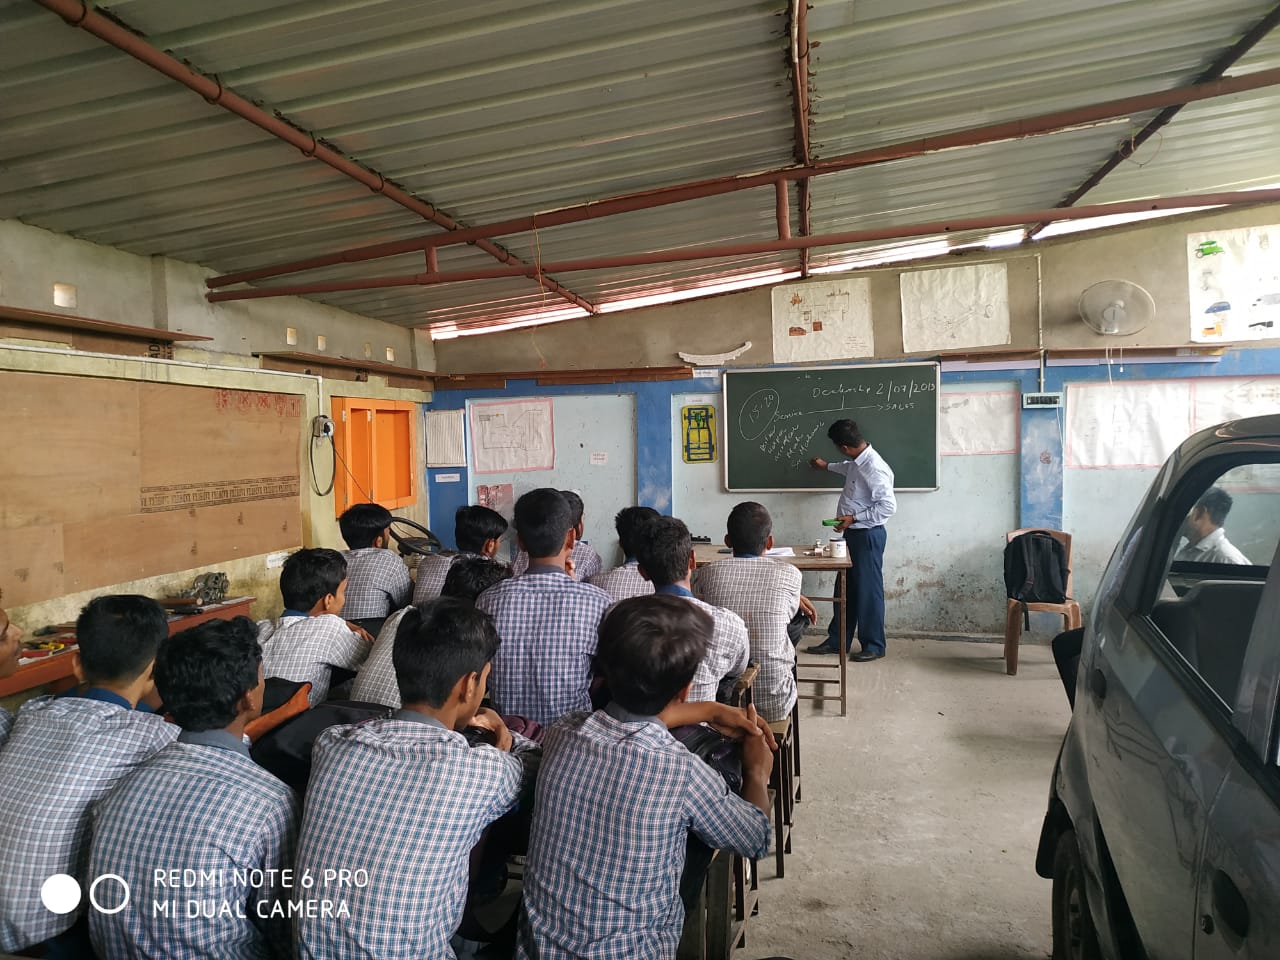 Career counseling program organized by Centum Workskills India Ltd. Industry experts Mr. Bimal Kumar Nandy from Online Equipments delivered his speech in front Students.